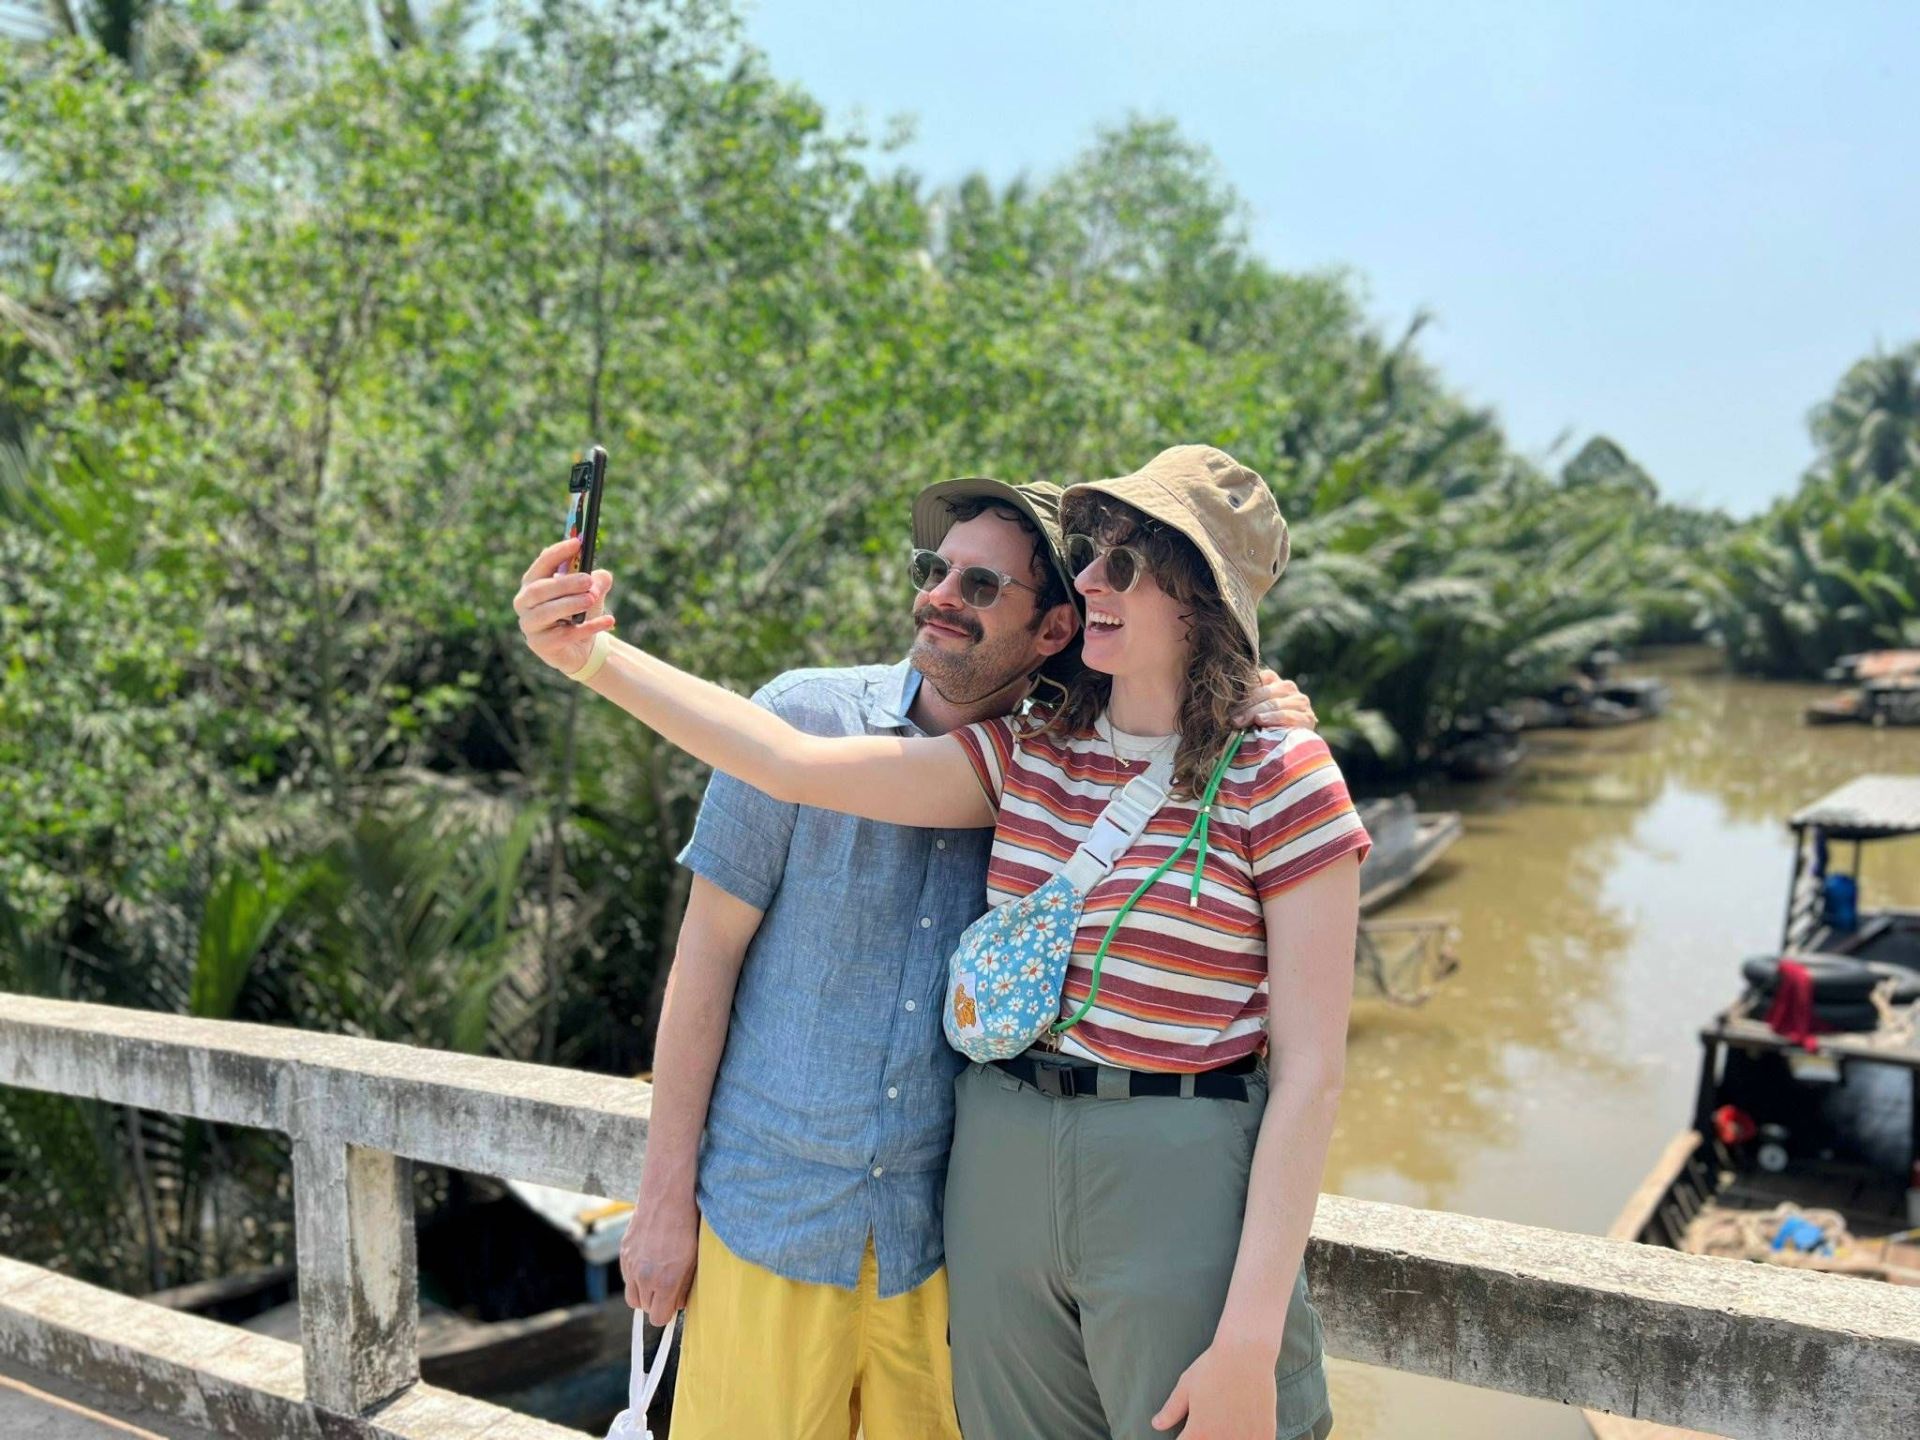 What To Do To Get Unique Moments In 2-Day Mekong Delta?